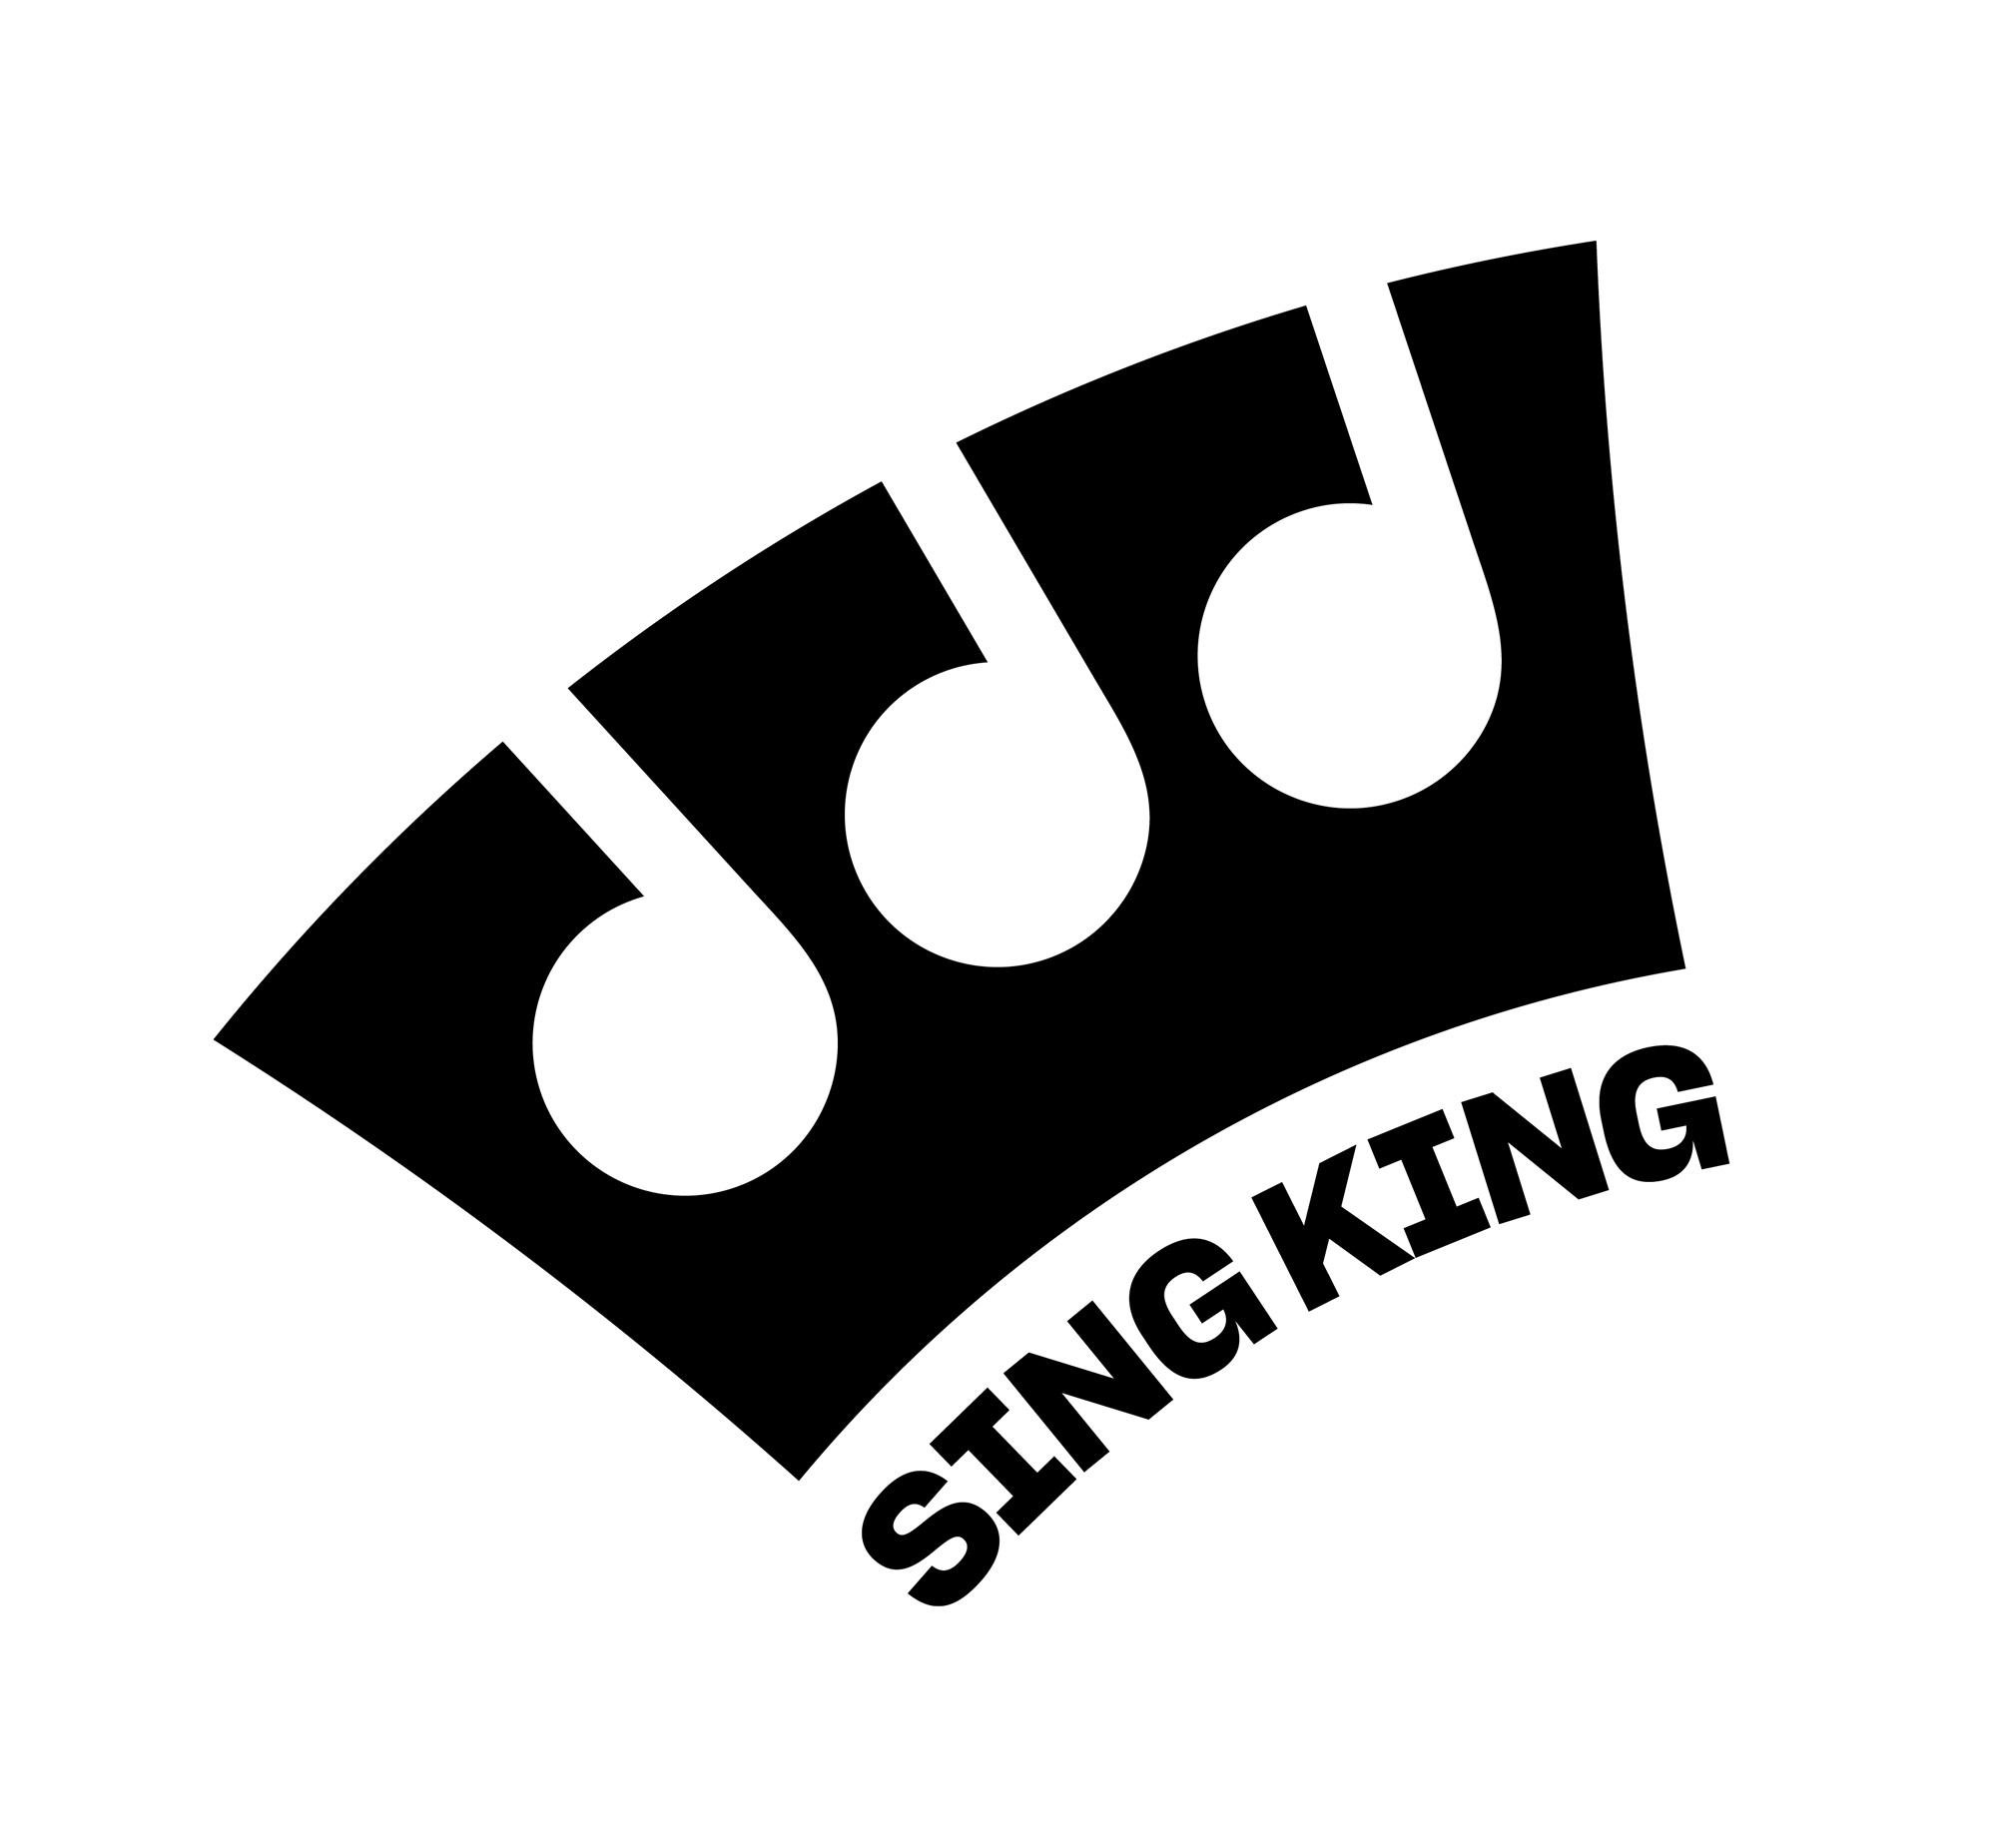 New Logo and Identity for Sing King by Nomad